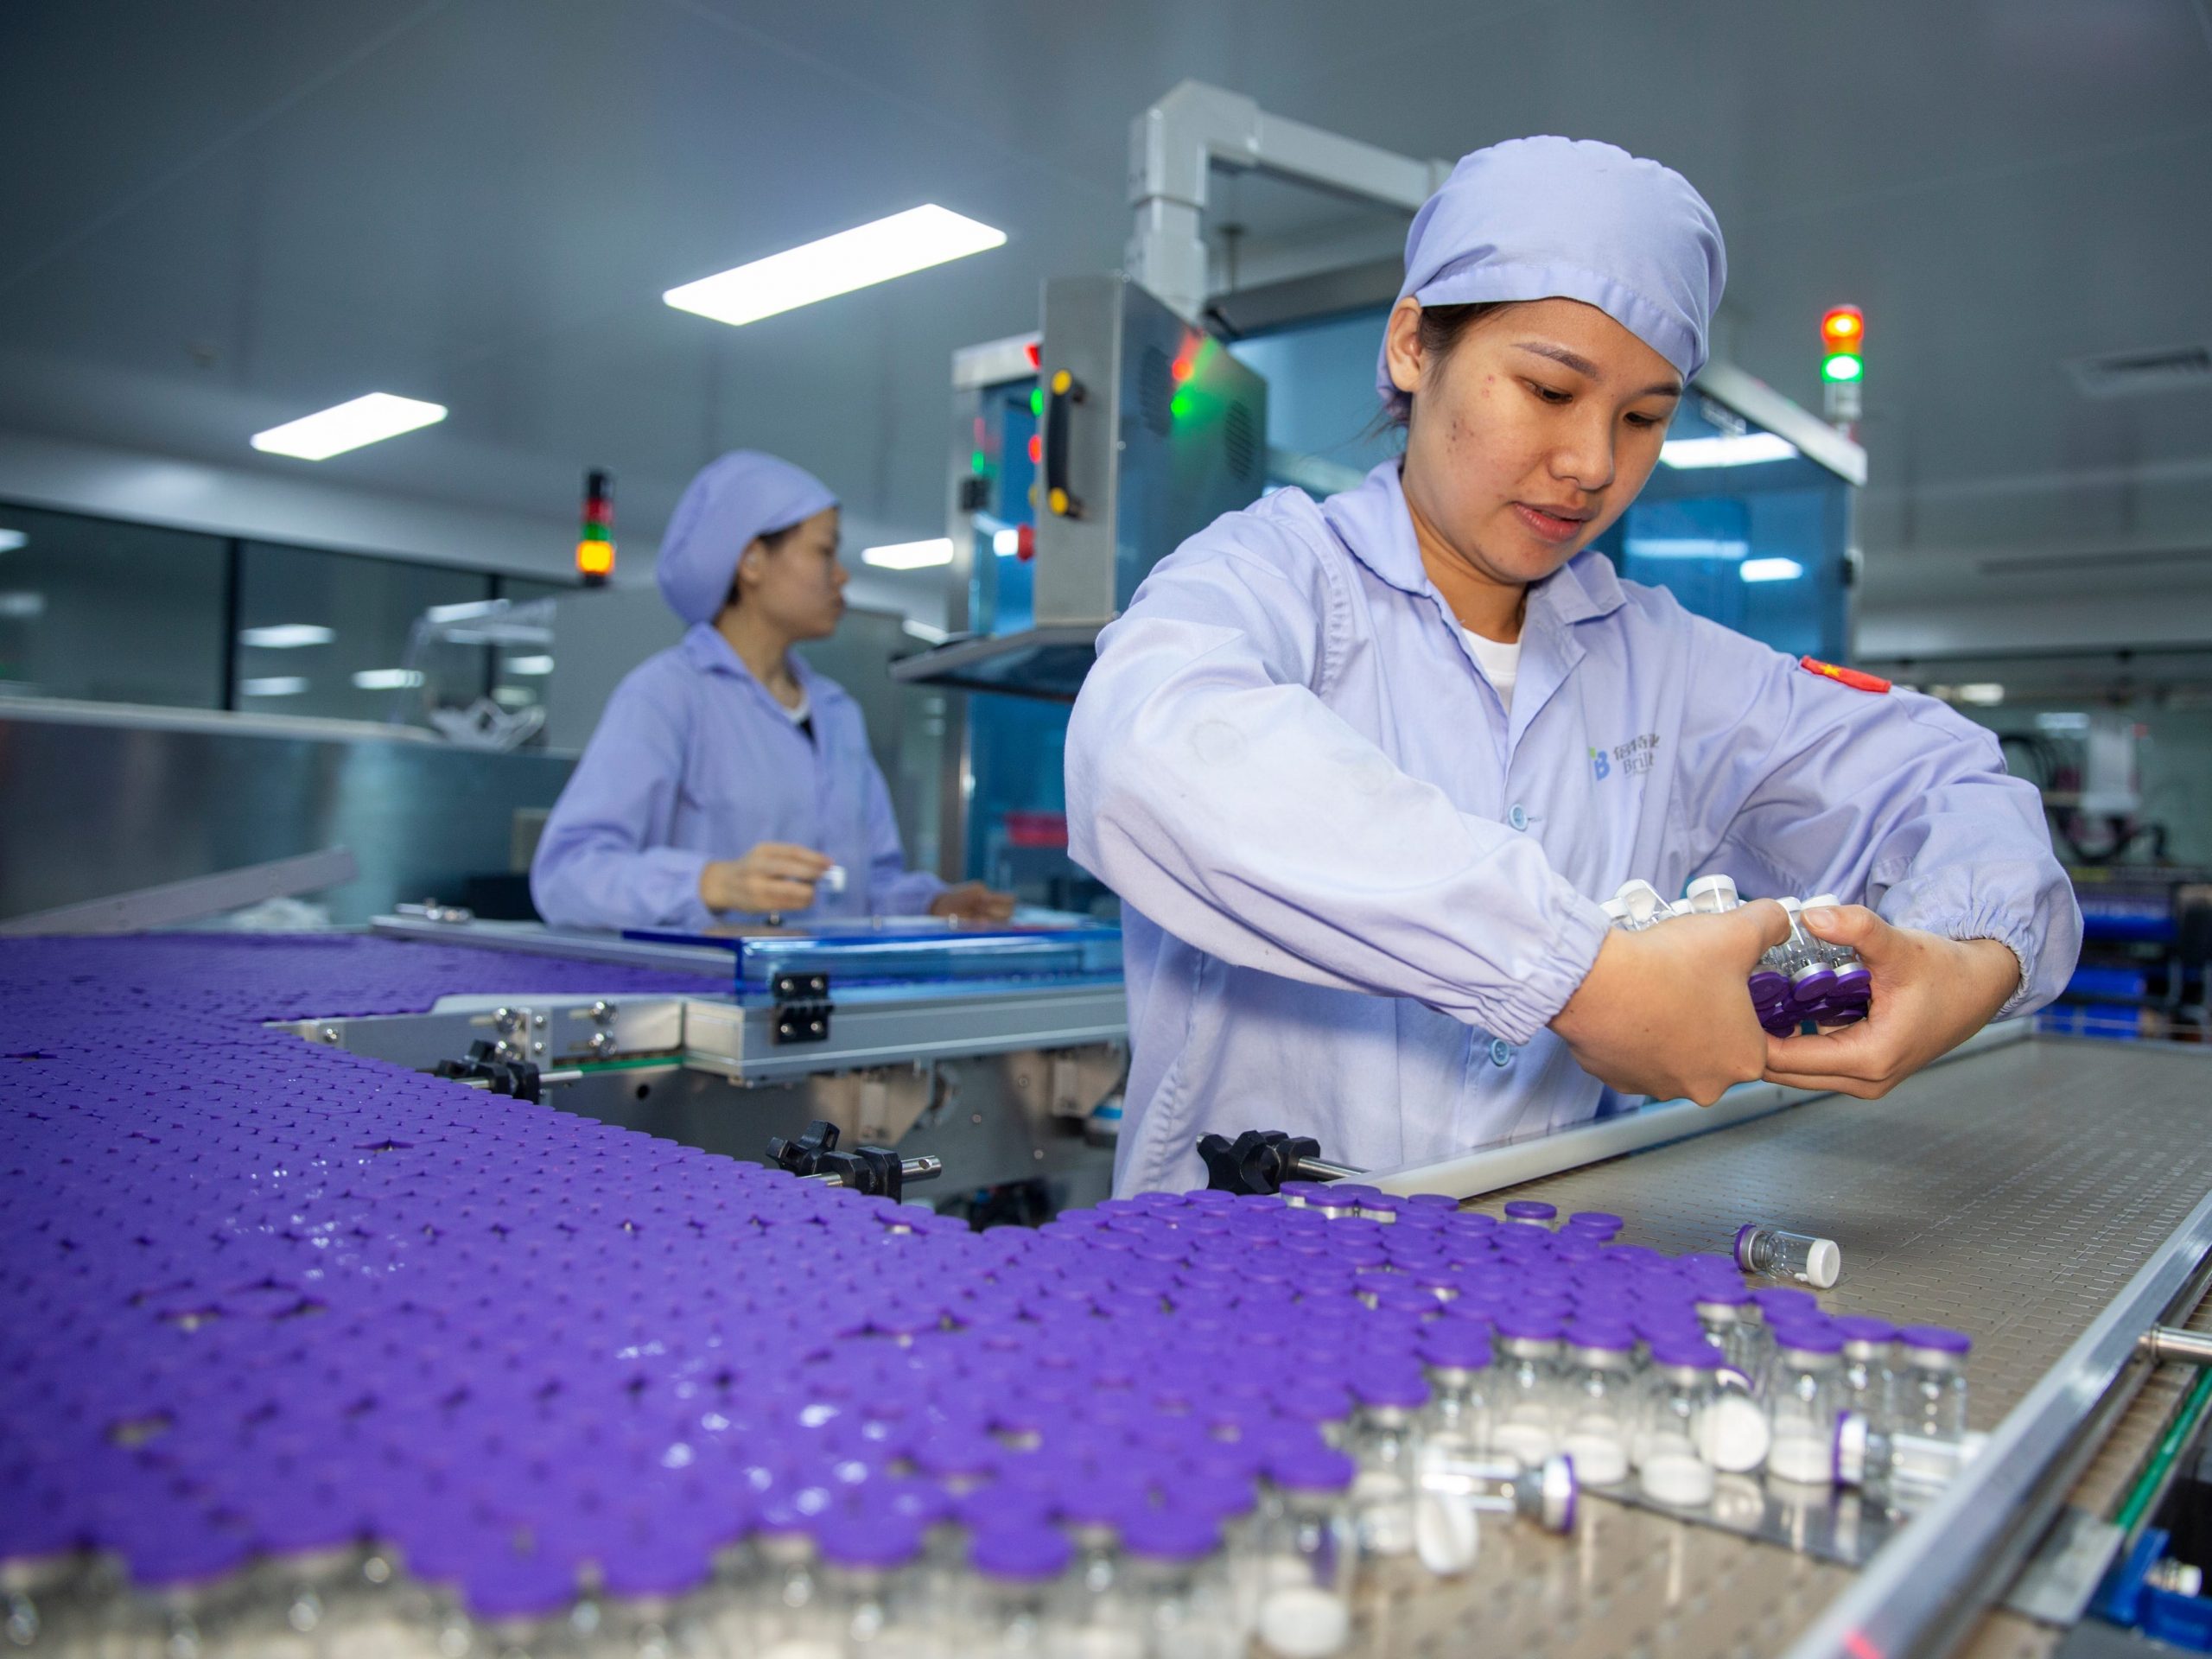 Employees work at a workshop in Haikou Brilliant Pharmaceutical Co., Ltd.